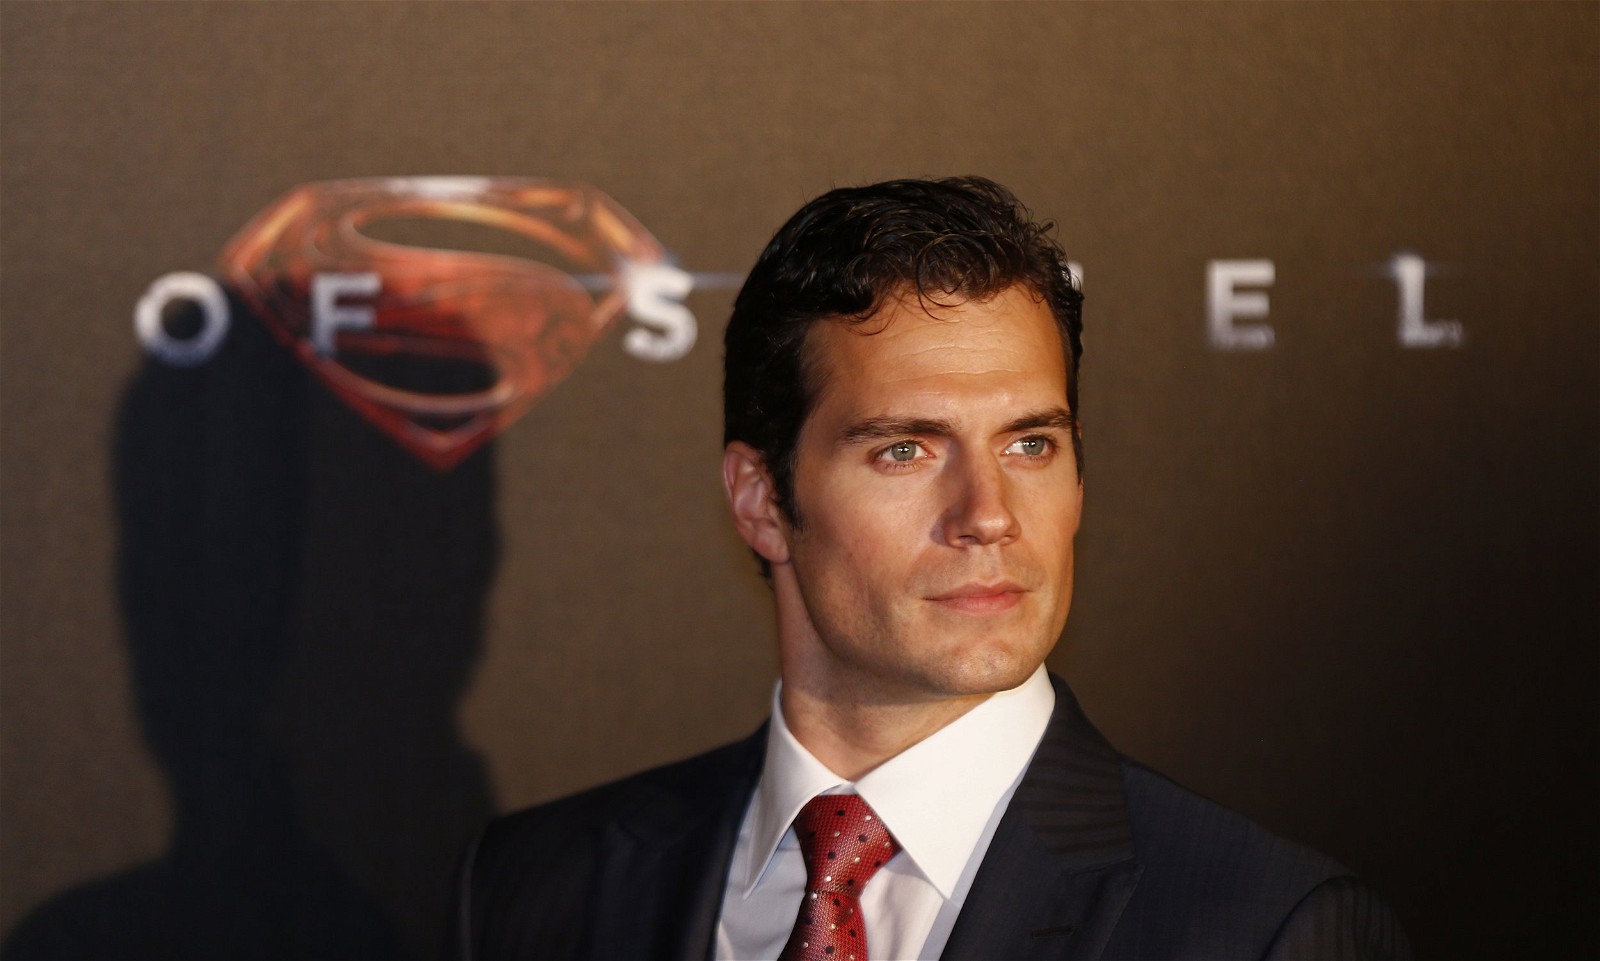 Henry Cavill at the Man of Steel premiere